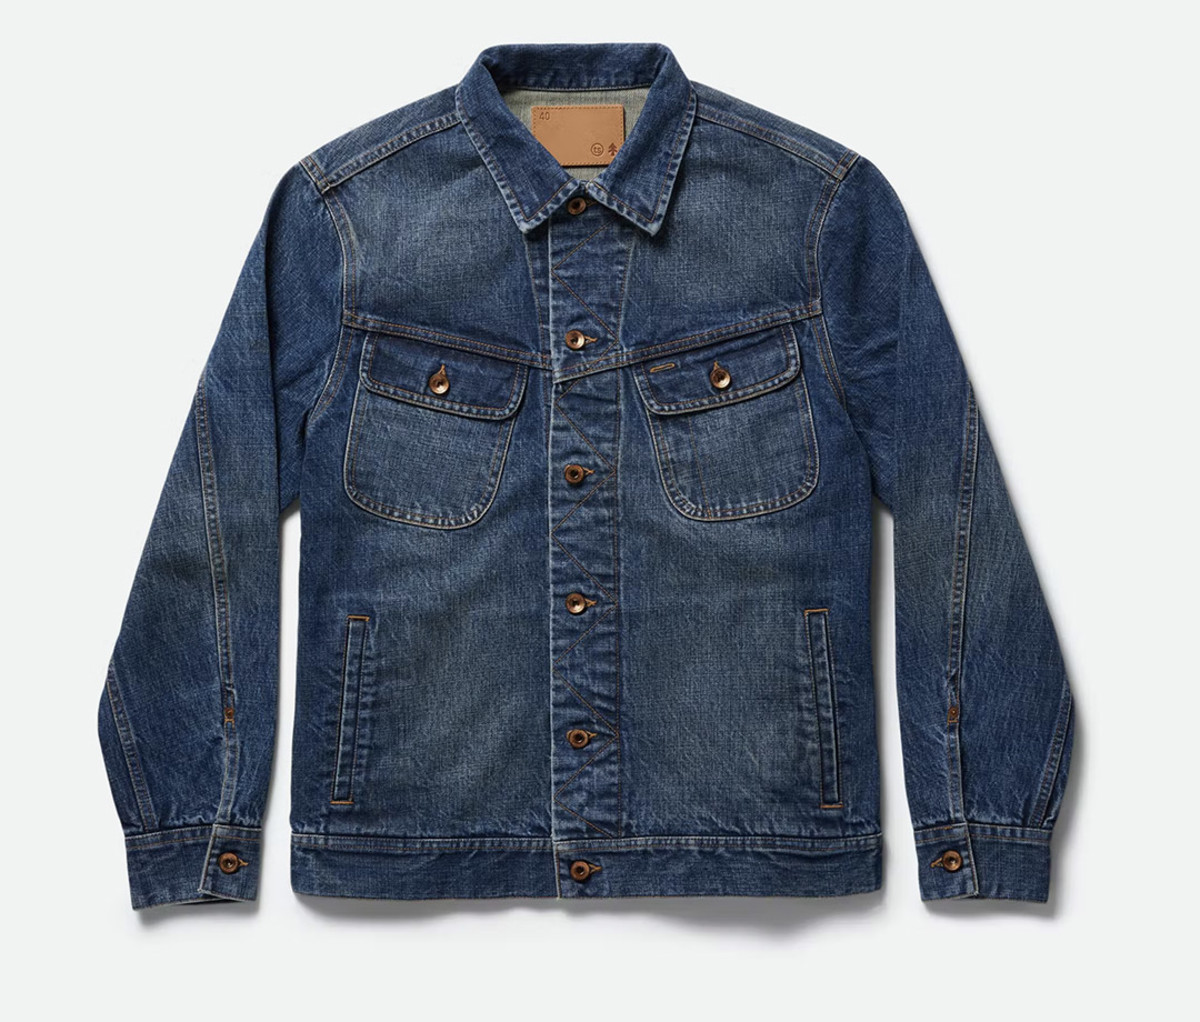 Pick up a Gorgeous New Denim Jacket in This Huckberry x Taylor Stitch ...